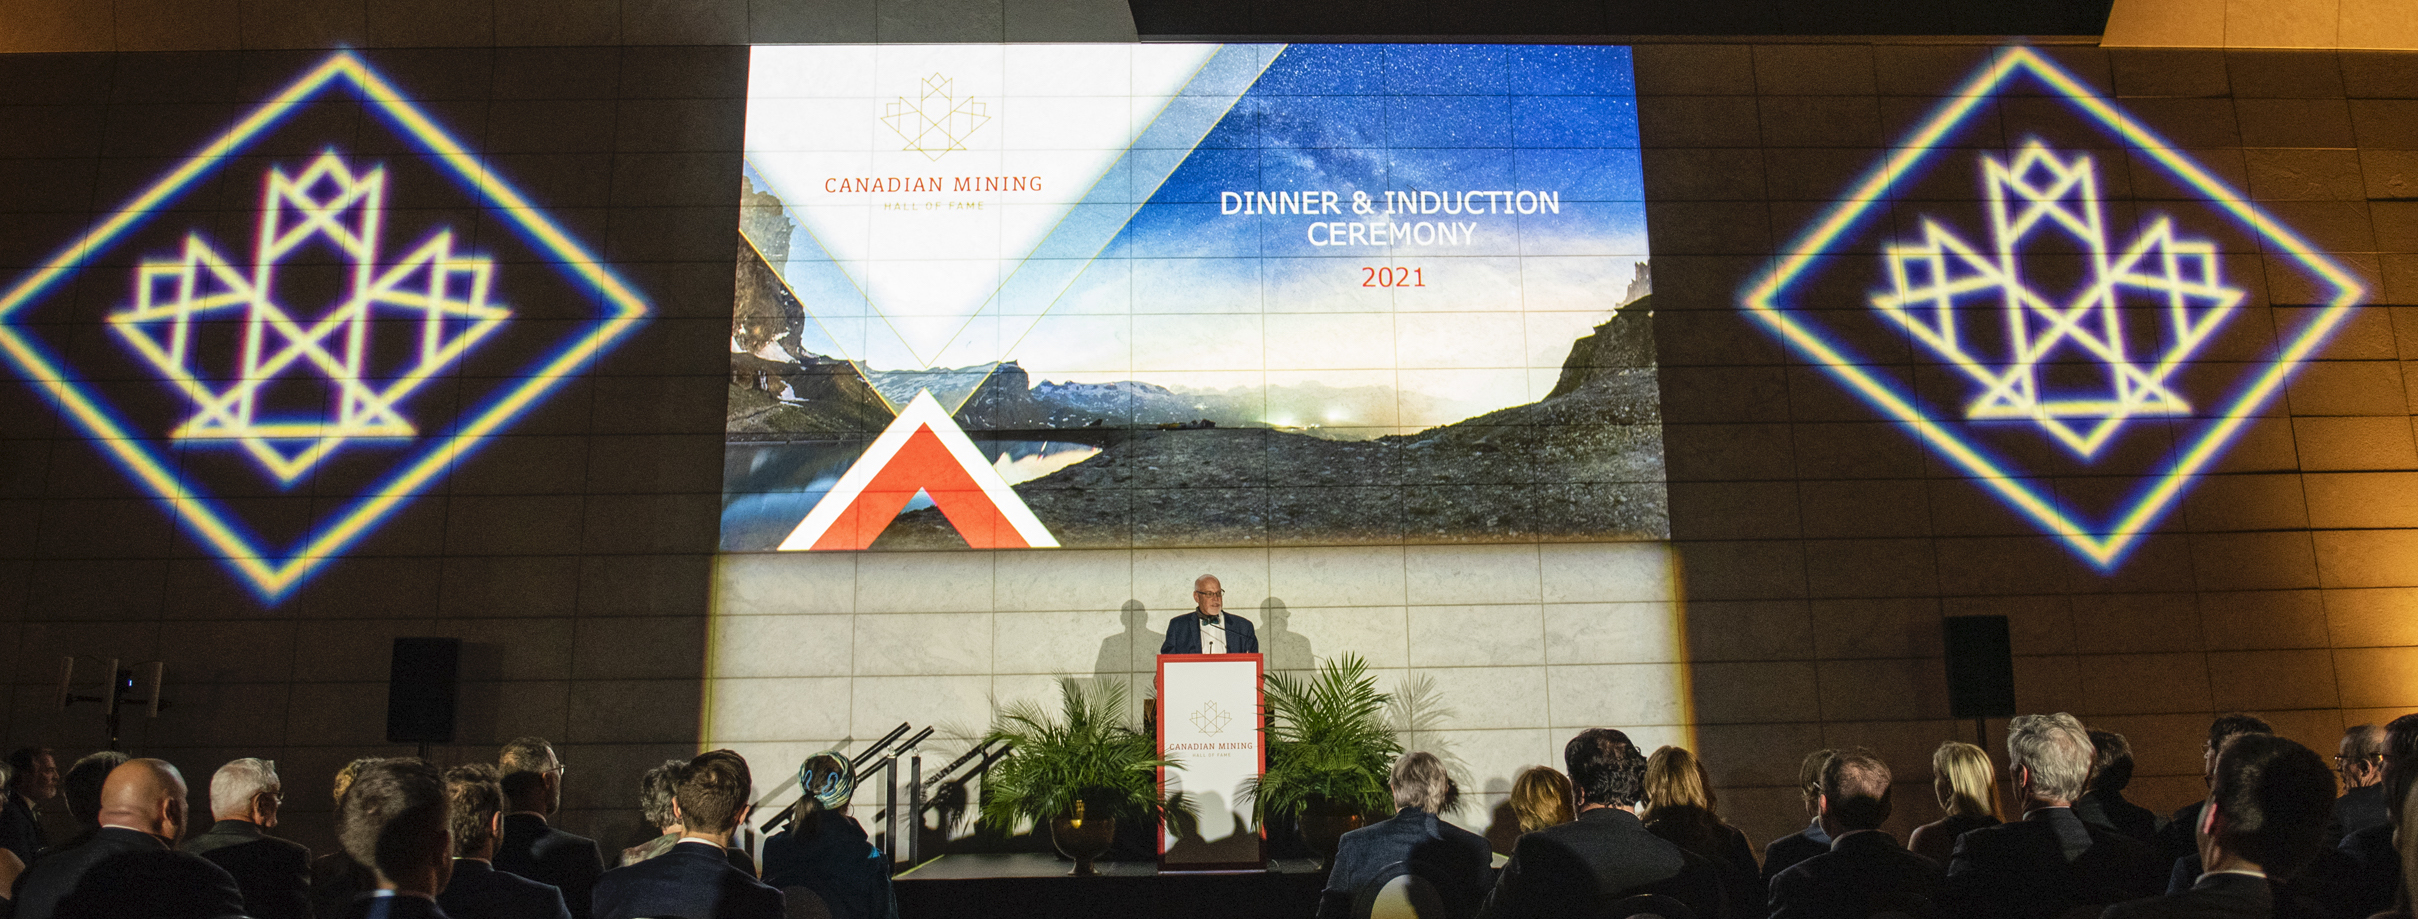 Canadian Mining Hall of Fame celebrates new inductees at gala dinner